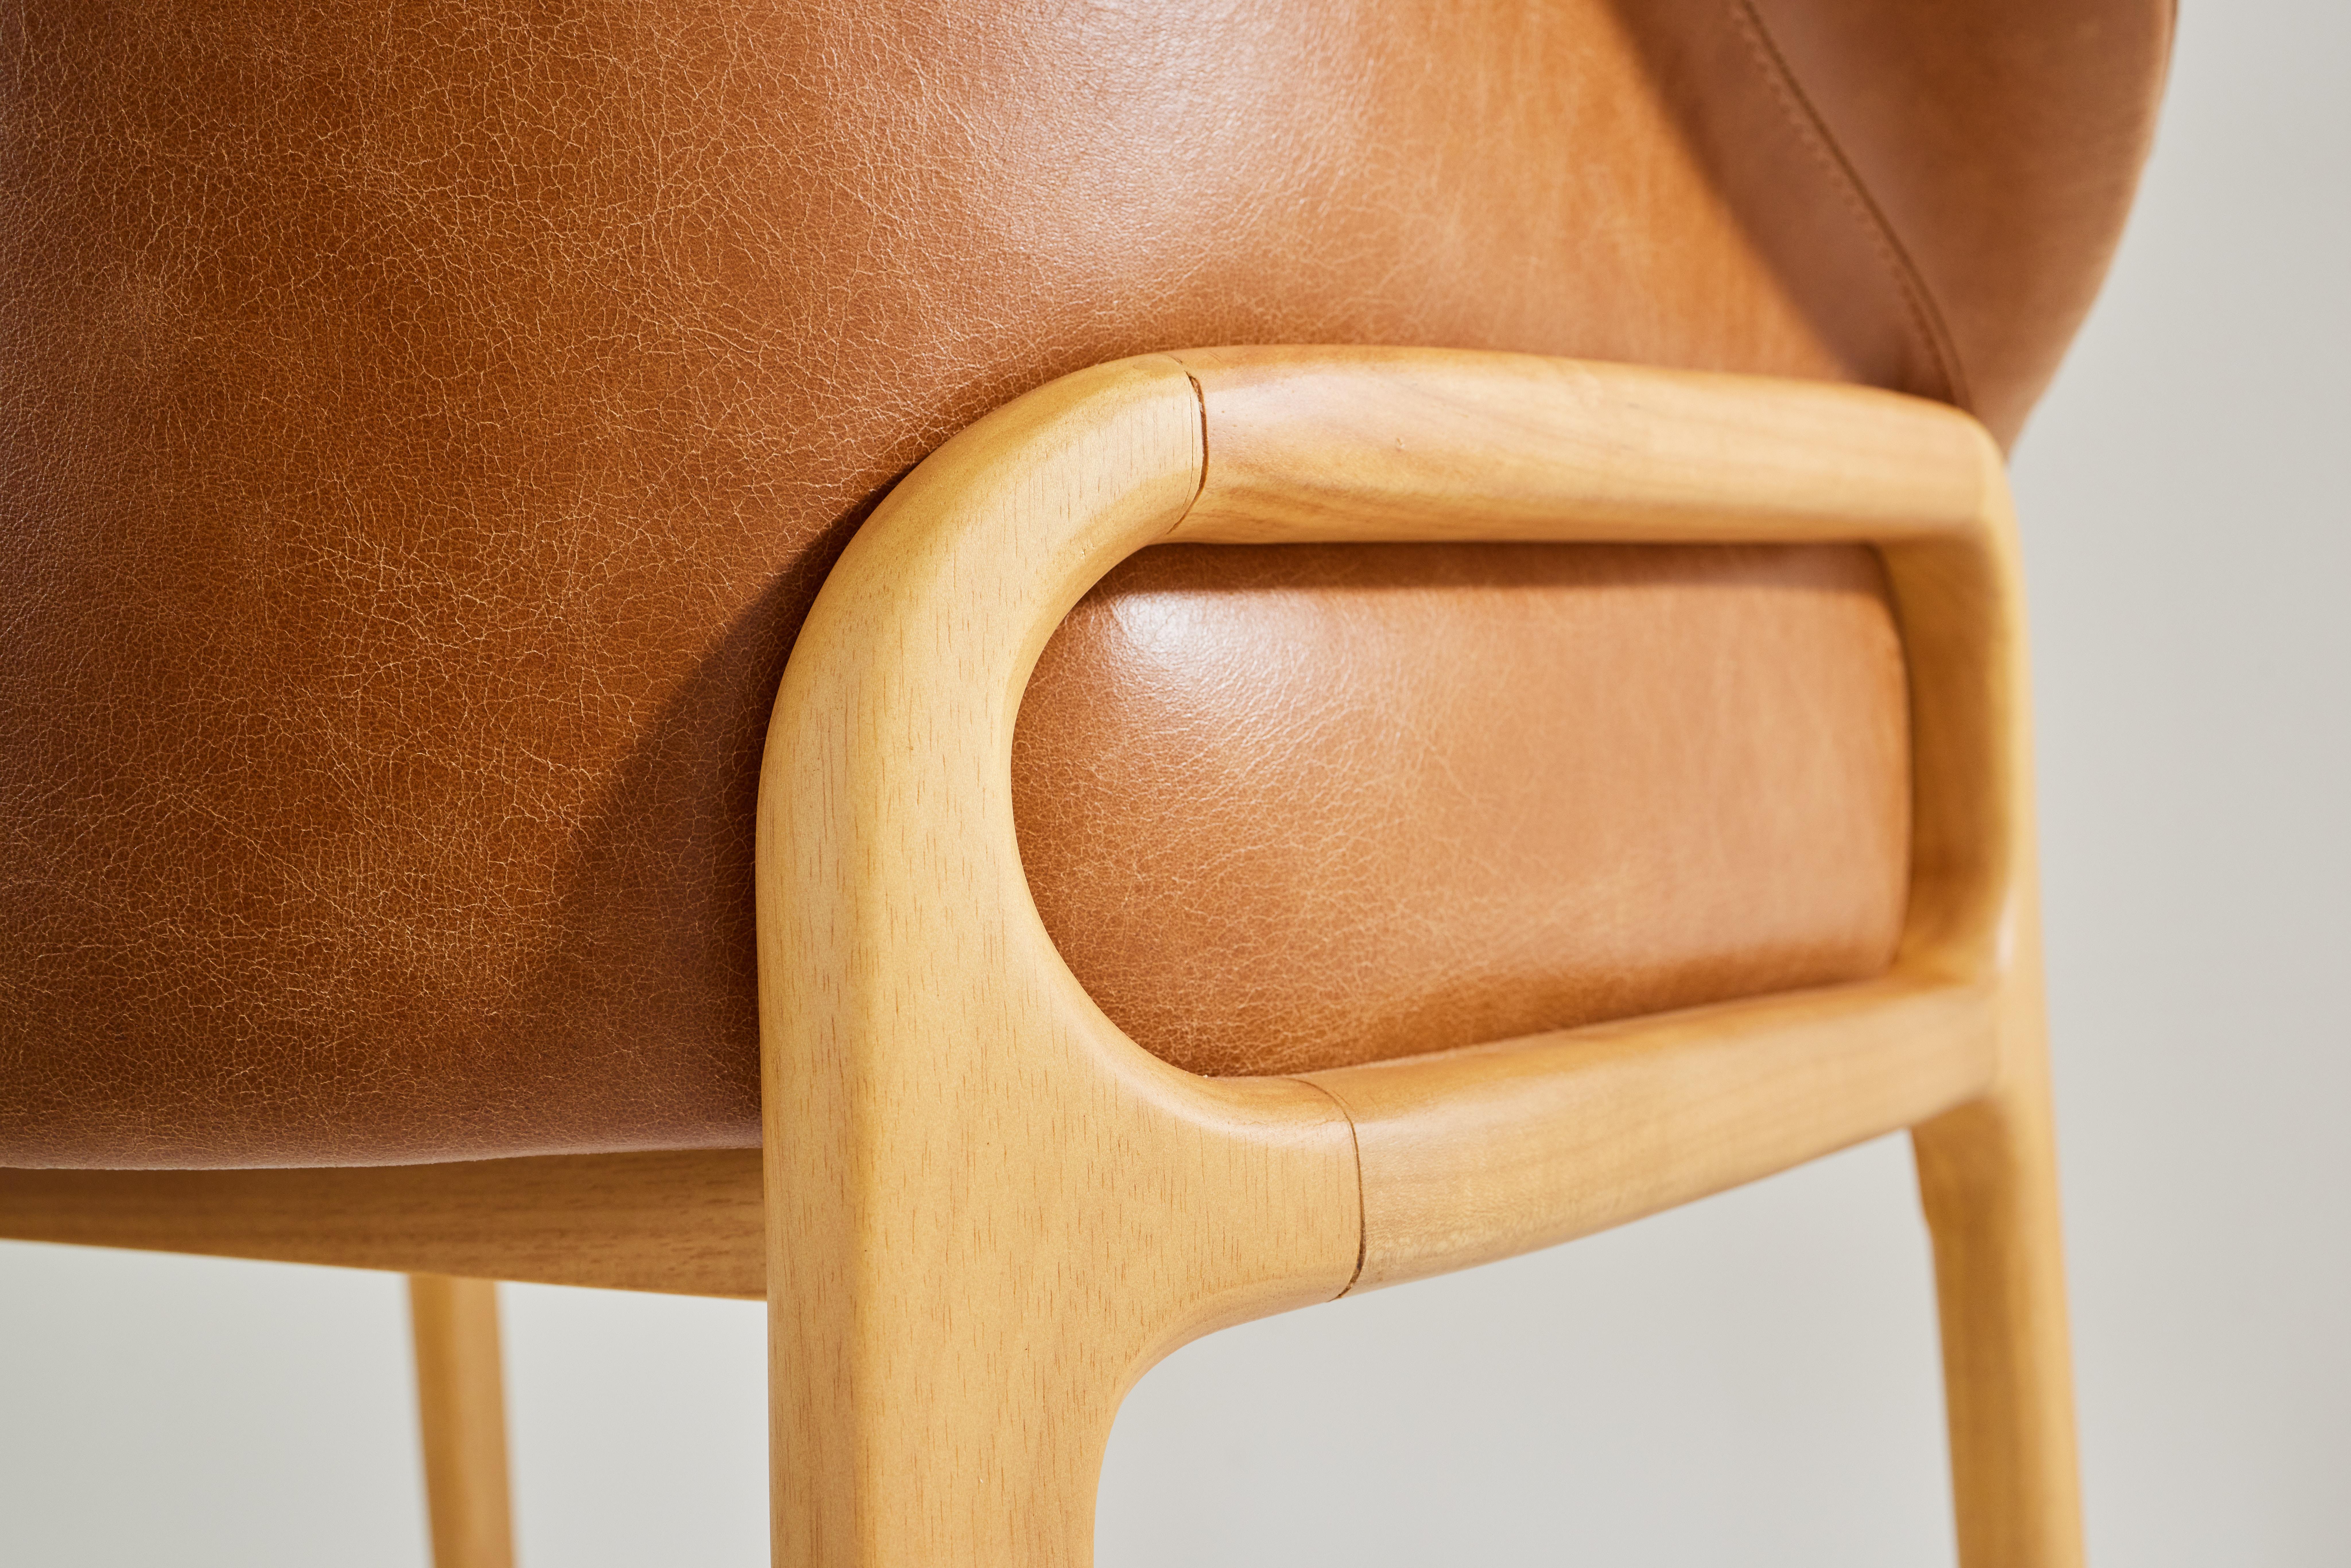 Leather Minimalist Organic Chair in Solid Wood, camel leather Seating tone For Sale